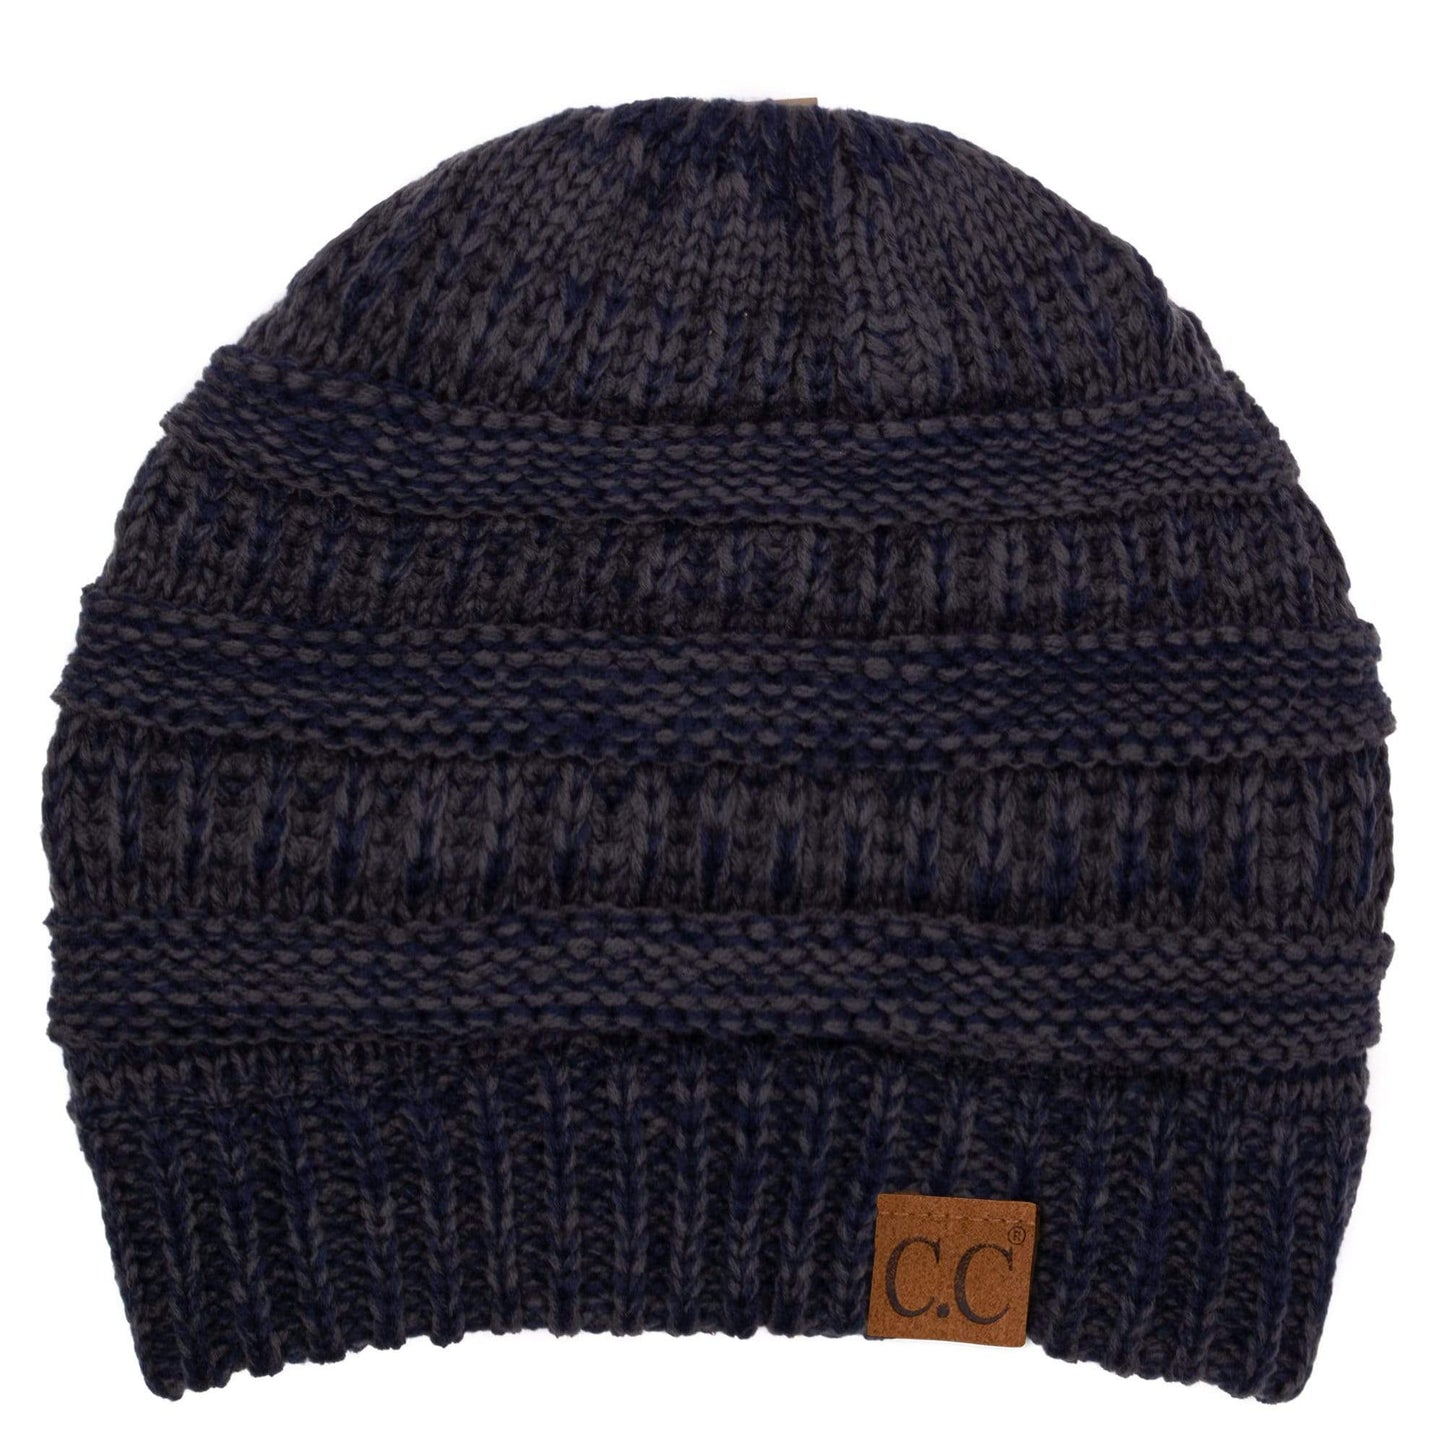 C.C Apparel Two Tone Dk Navy/Grey C.C Trendy Warm Chunky Soft Stretch Two-Toned Cable Knit Beanie Skully